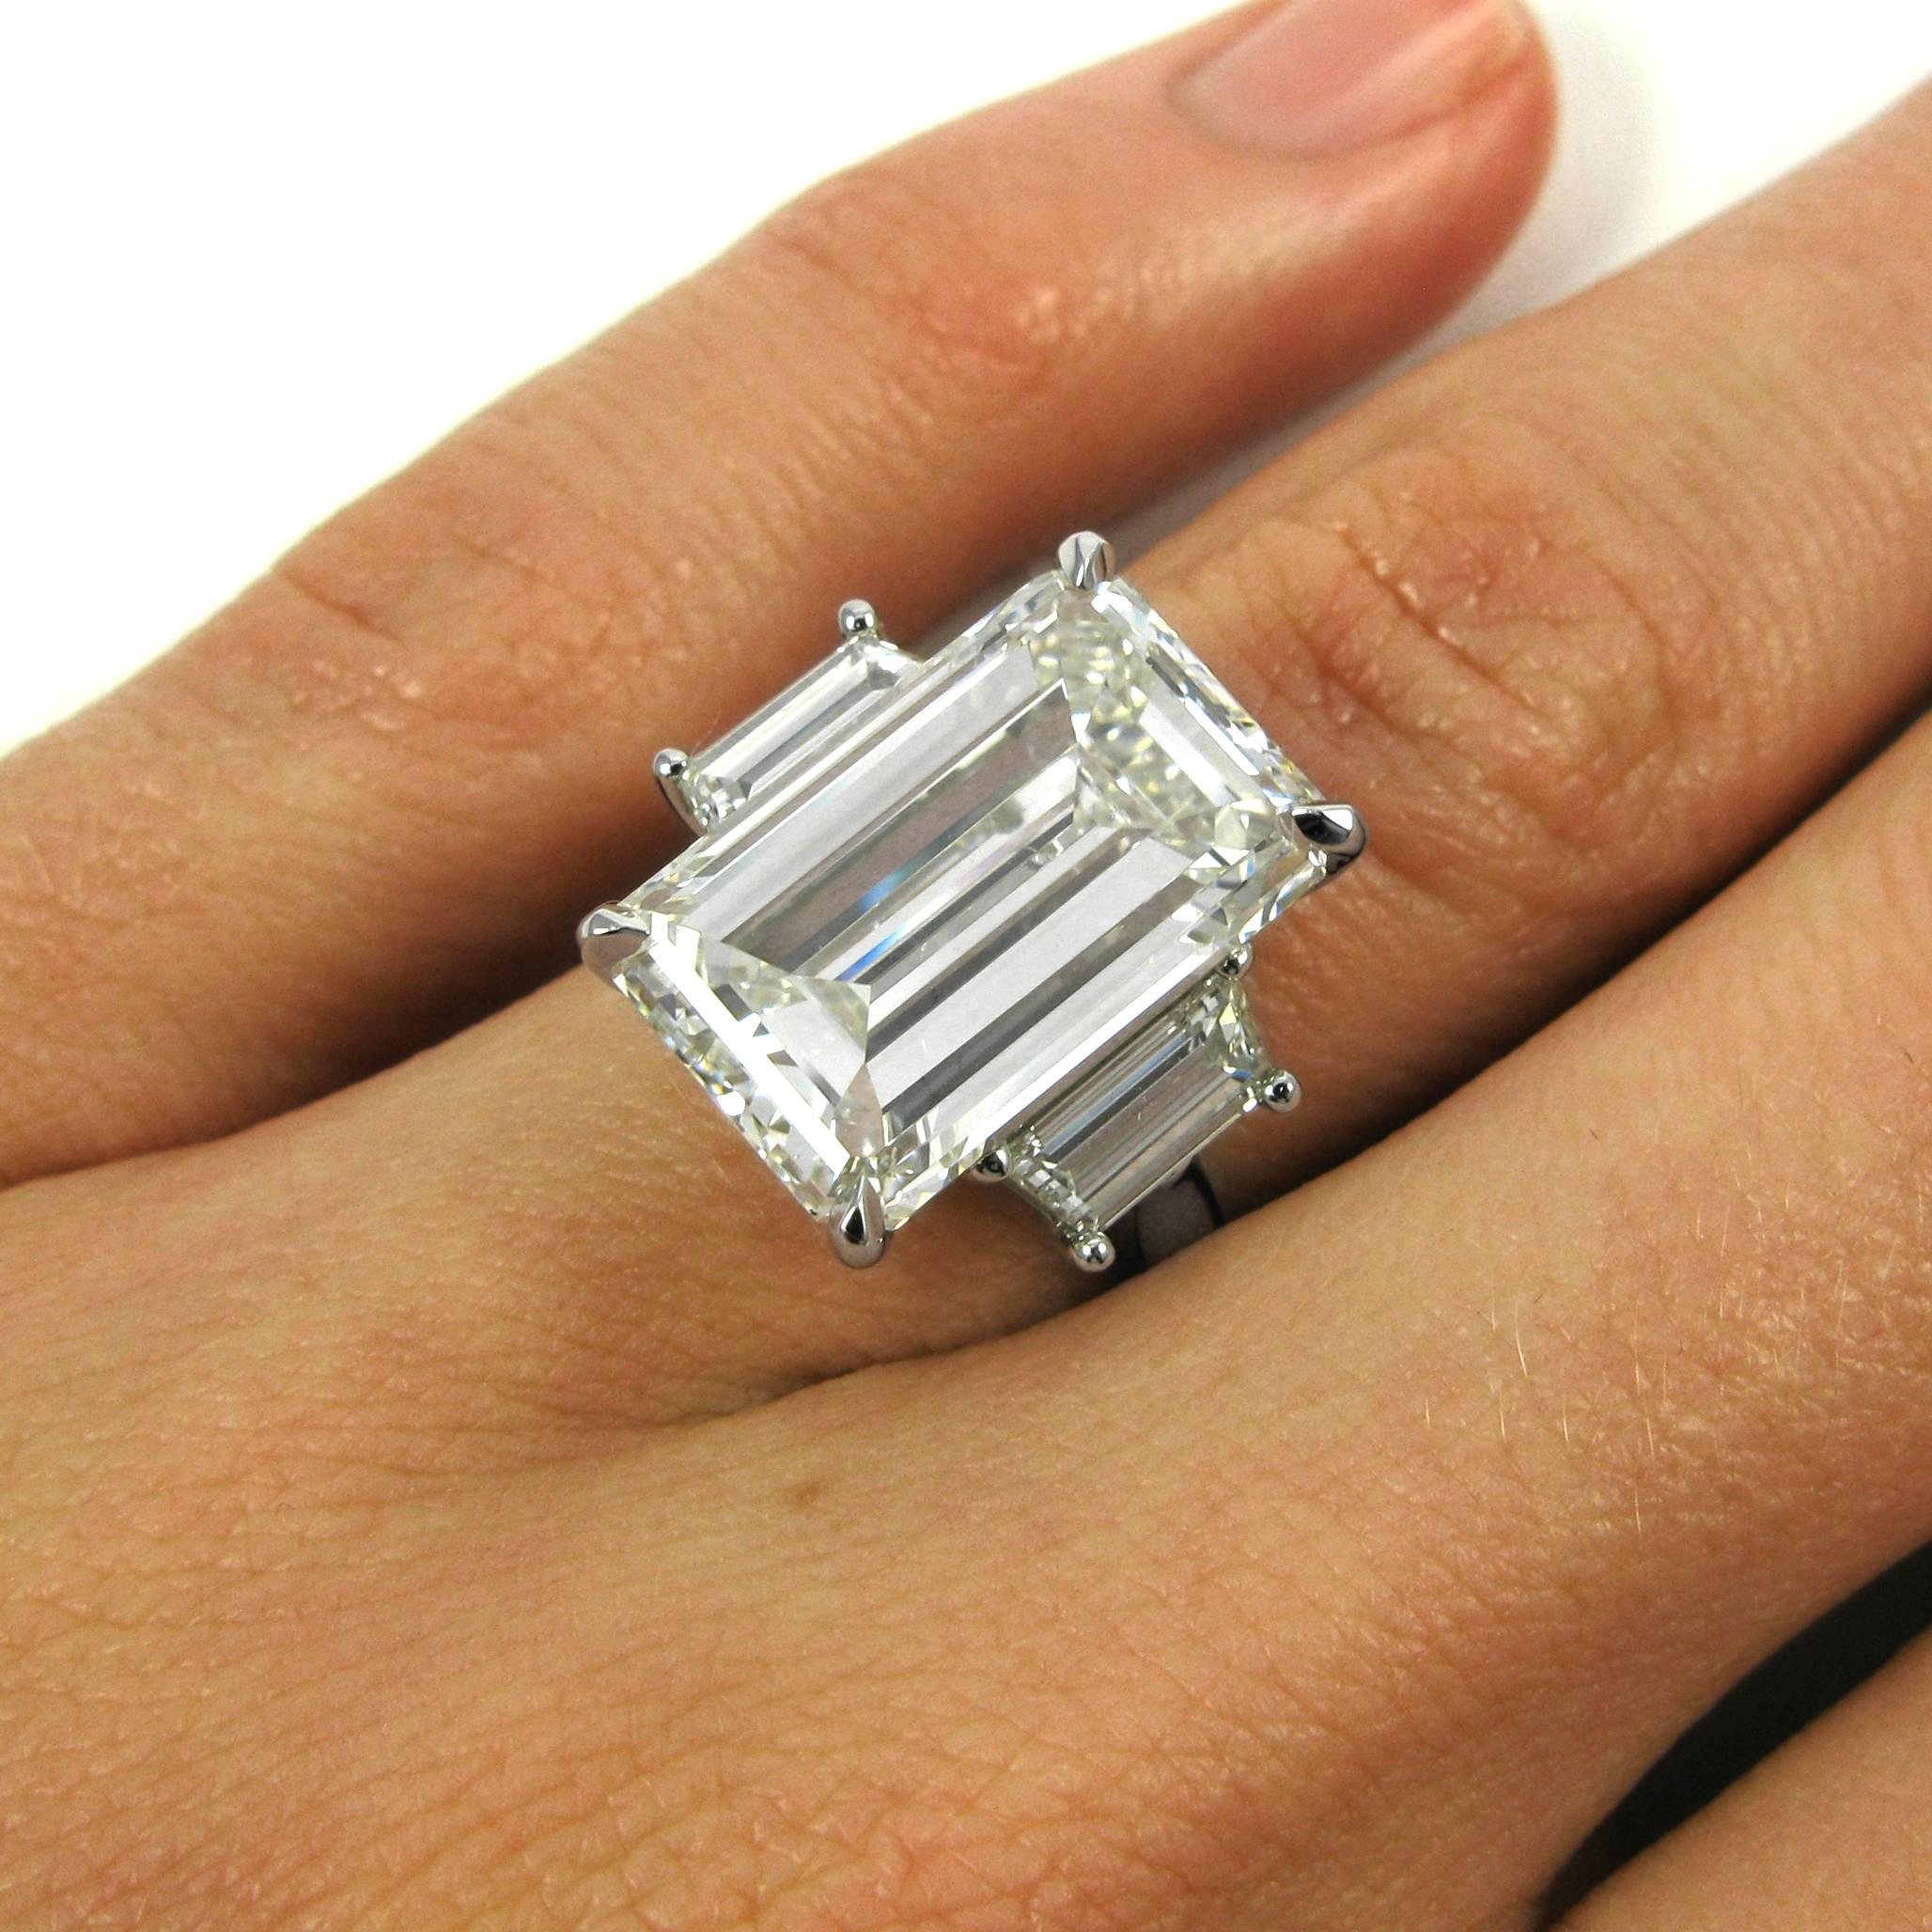 A lovely ring centering on a 10.38 carat emerald-cut diamond with J color and SI1 clarity, flanked by two trapezoid-cut diamonds totaling 1.08 carats. The three diamonds are set in four-prong basket settings atop a plain platinum ring shank.